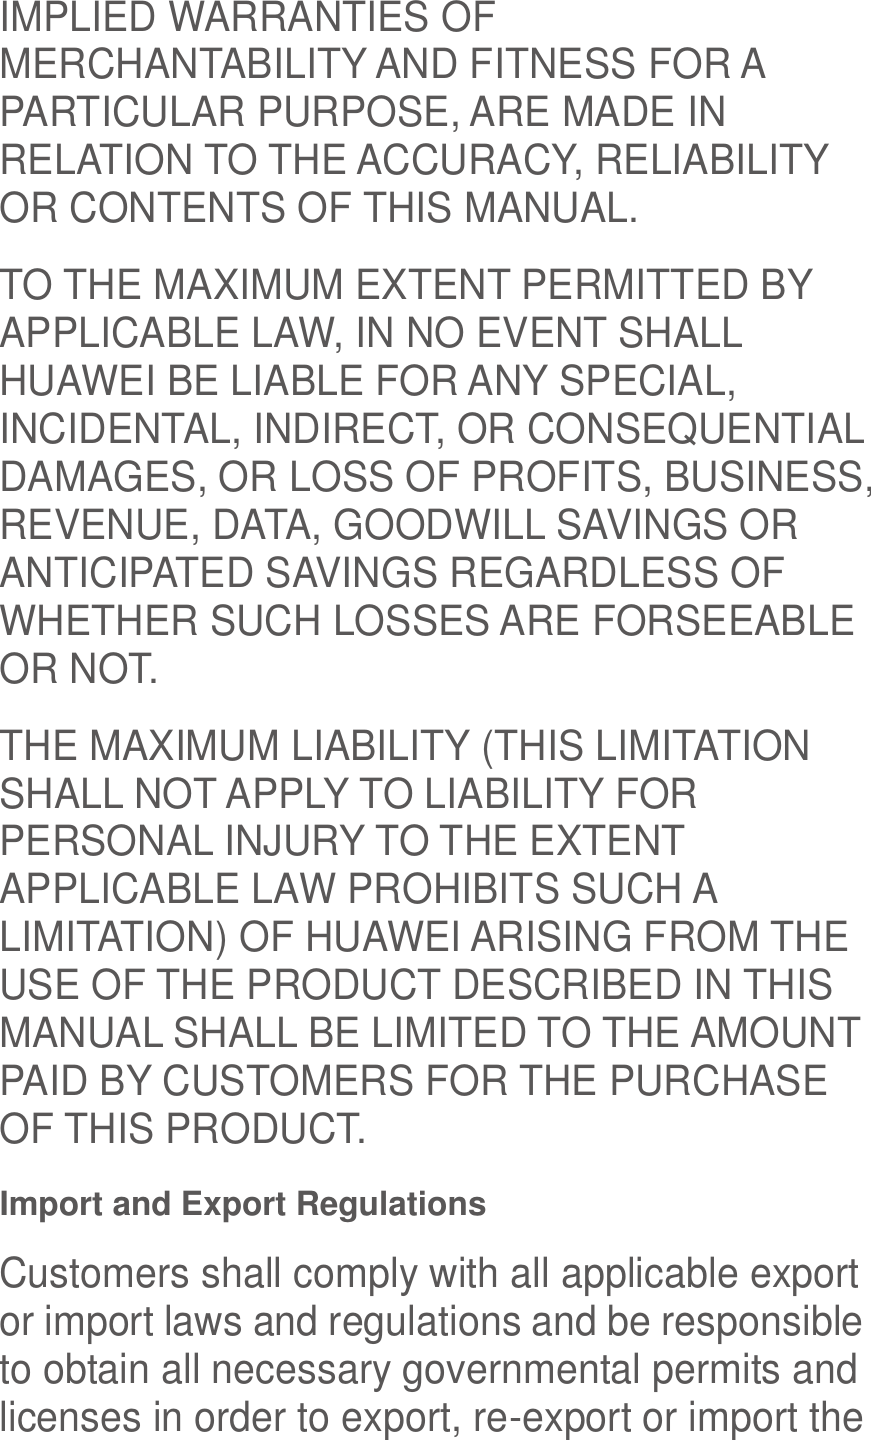  IMPLIED WARRANTIES OF MERCHANTABILITY AND FITNESS FOR A PARTICULAR PURPOSE, ARE MADE IN RELATION TO THE ACCURACY, RELIABILITY OR CONTENTS OF THIS MANUAL. TO THE MAXIMUM EXTENT PERMITTED BY APPLICABLE LAW, IN NO EVENT SHALL HUAWEI BE LIABLE FOR ANY SPECIAL, INCIDENTAL, INDIRECT, OR CONSEQUENTIAL DAMAGES, OR LOSS OF PROFITS, BUSINESS, REVENUE, DATA, GOODWILL SAVINGS OR ANTICIPATED SAVINGS REGARDLESS OF WHETHER SUCH LOSSES ARE FORSEEABLE OR NOT. THE MAXIMUM LIABILITY (THIS LIMITATION SHALL NOT APPLY TO LIABILITY FOR PERSONAL INJURY TO THE EXTENT APPLICABLE LAW PROHIBITS SUCH A LIMITATION) OF HUAWEI ARISING FROM THE USE OF THE PRODUCT DESCRIBED IN THIS MANUAL SHALL BE LIMITED TO THE AMOUNT PAID BY CUSTOMERS FOR THE PURCHASE OF THIS PRODUCT. Import and Export Regulations Customers shall comply with all applicable export or import laws and regulations and be responsible to obtain all necessary governmental permits and licenses in order to export, re-export or import the 